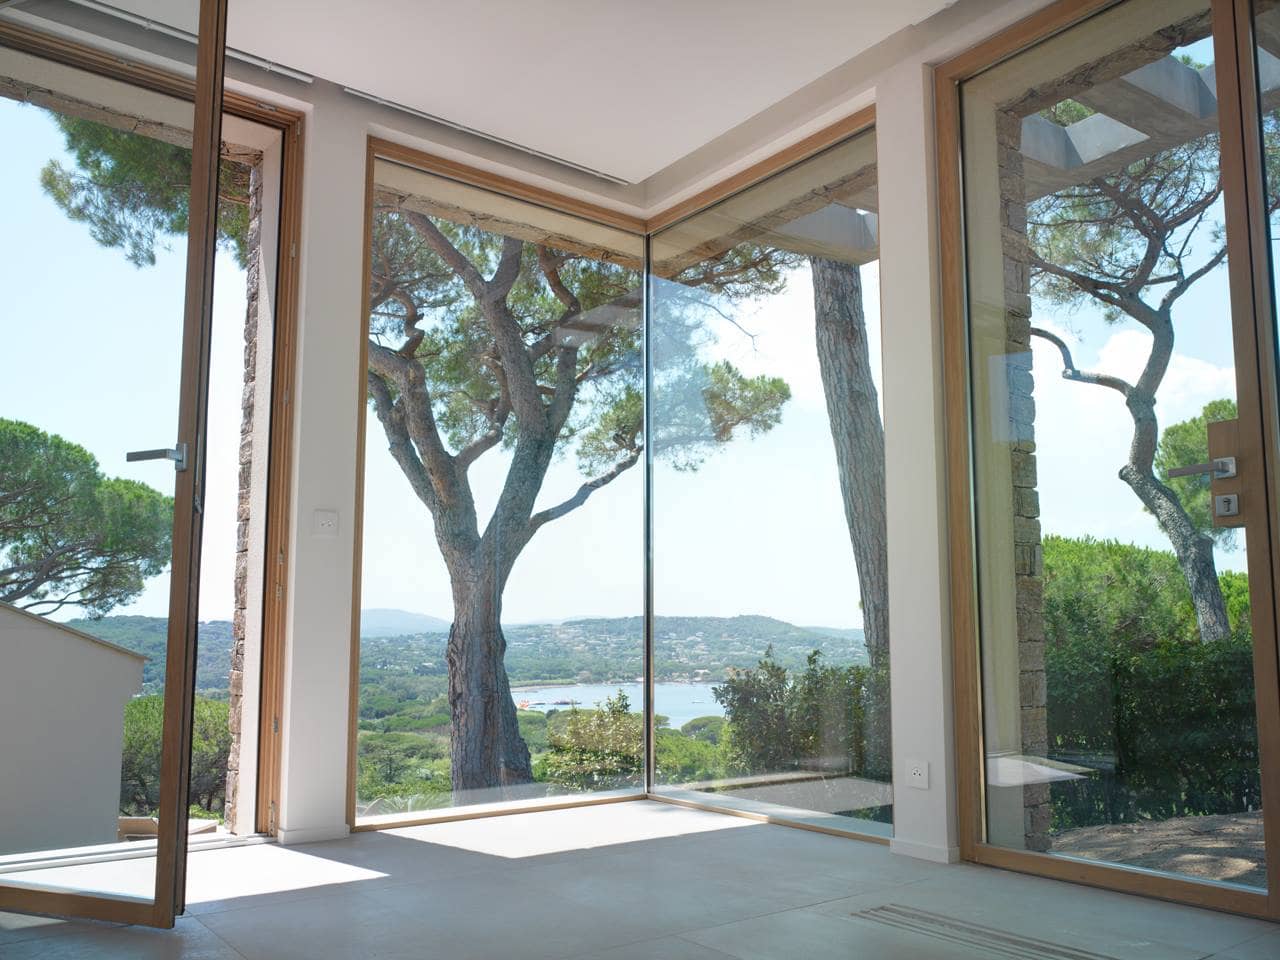 A minimal frame butt joint fixed window allows for unobstructed views of St. Tropez